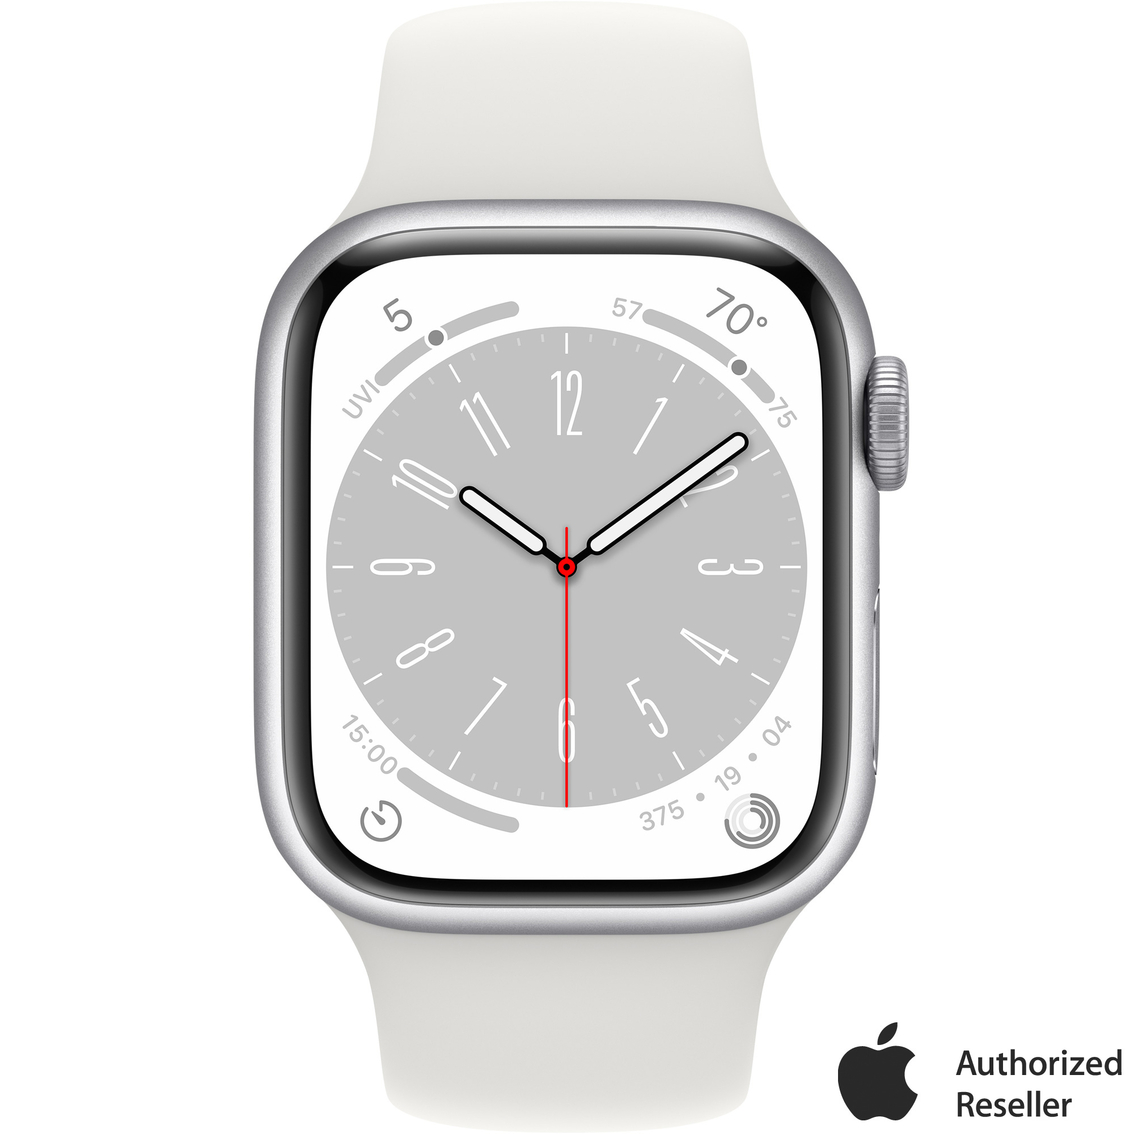 Military/Veterans: $100 off Apple Watch Series 8 GPS 41mm Aluminum Case with Sport Band ($299.00)